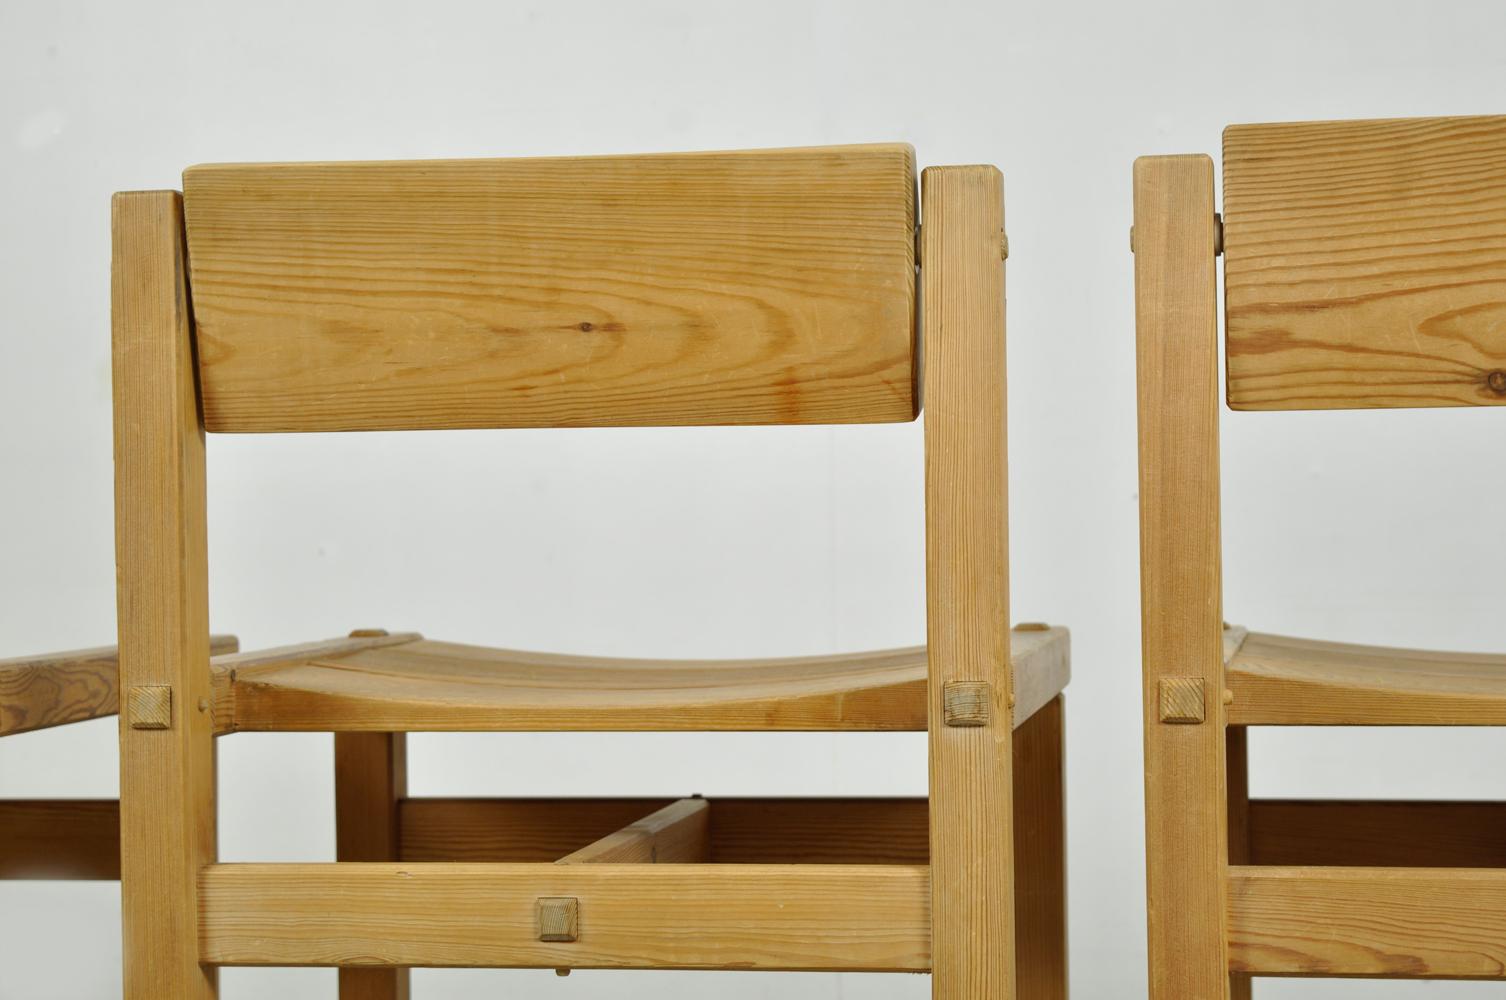 Trybo pine dining chairs (4) by Edvin Helseth for Stange Bruk, Norway 1960s For Sale 4